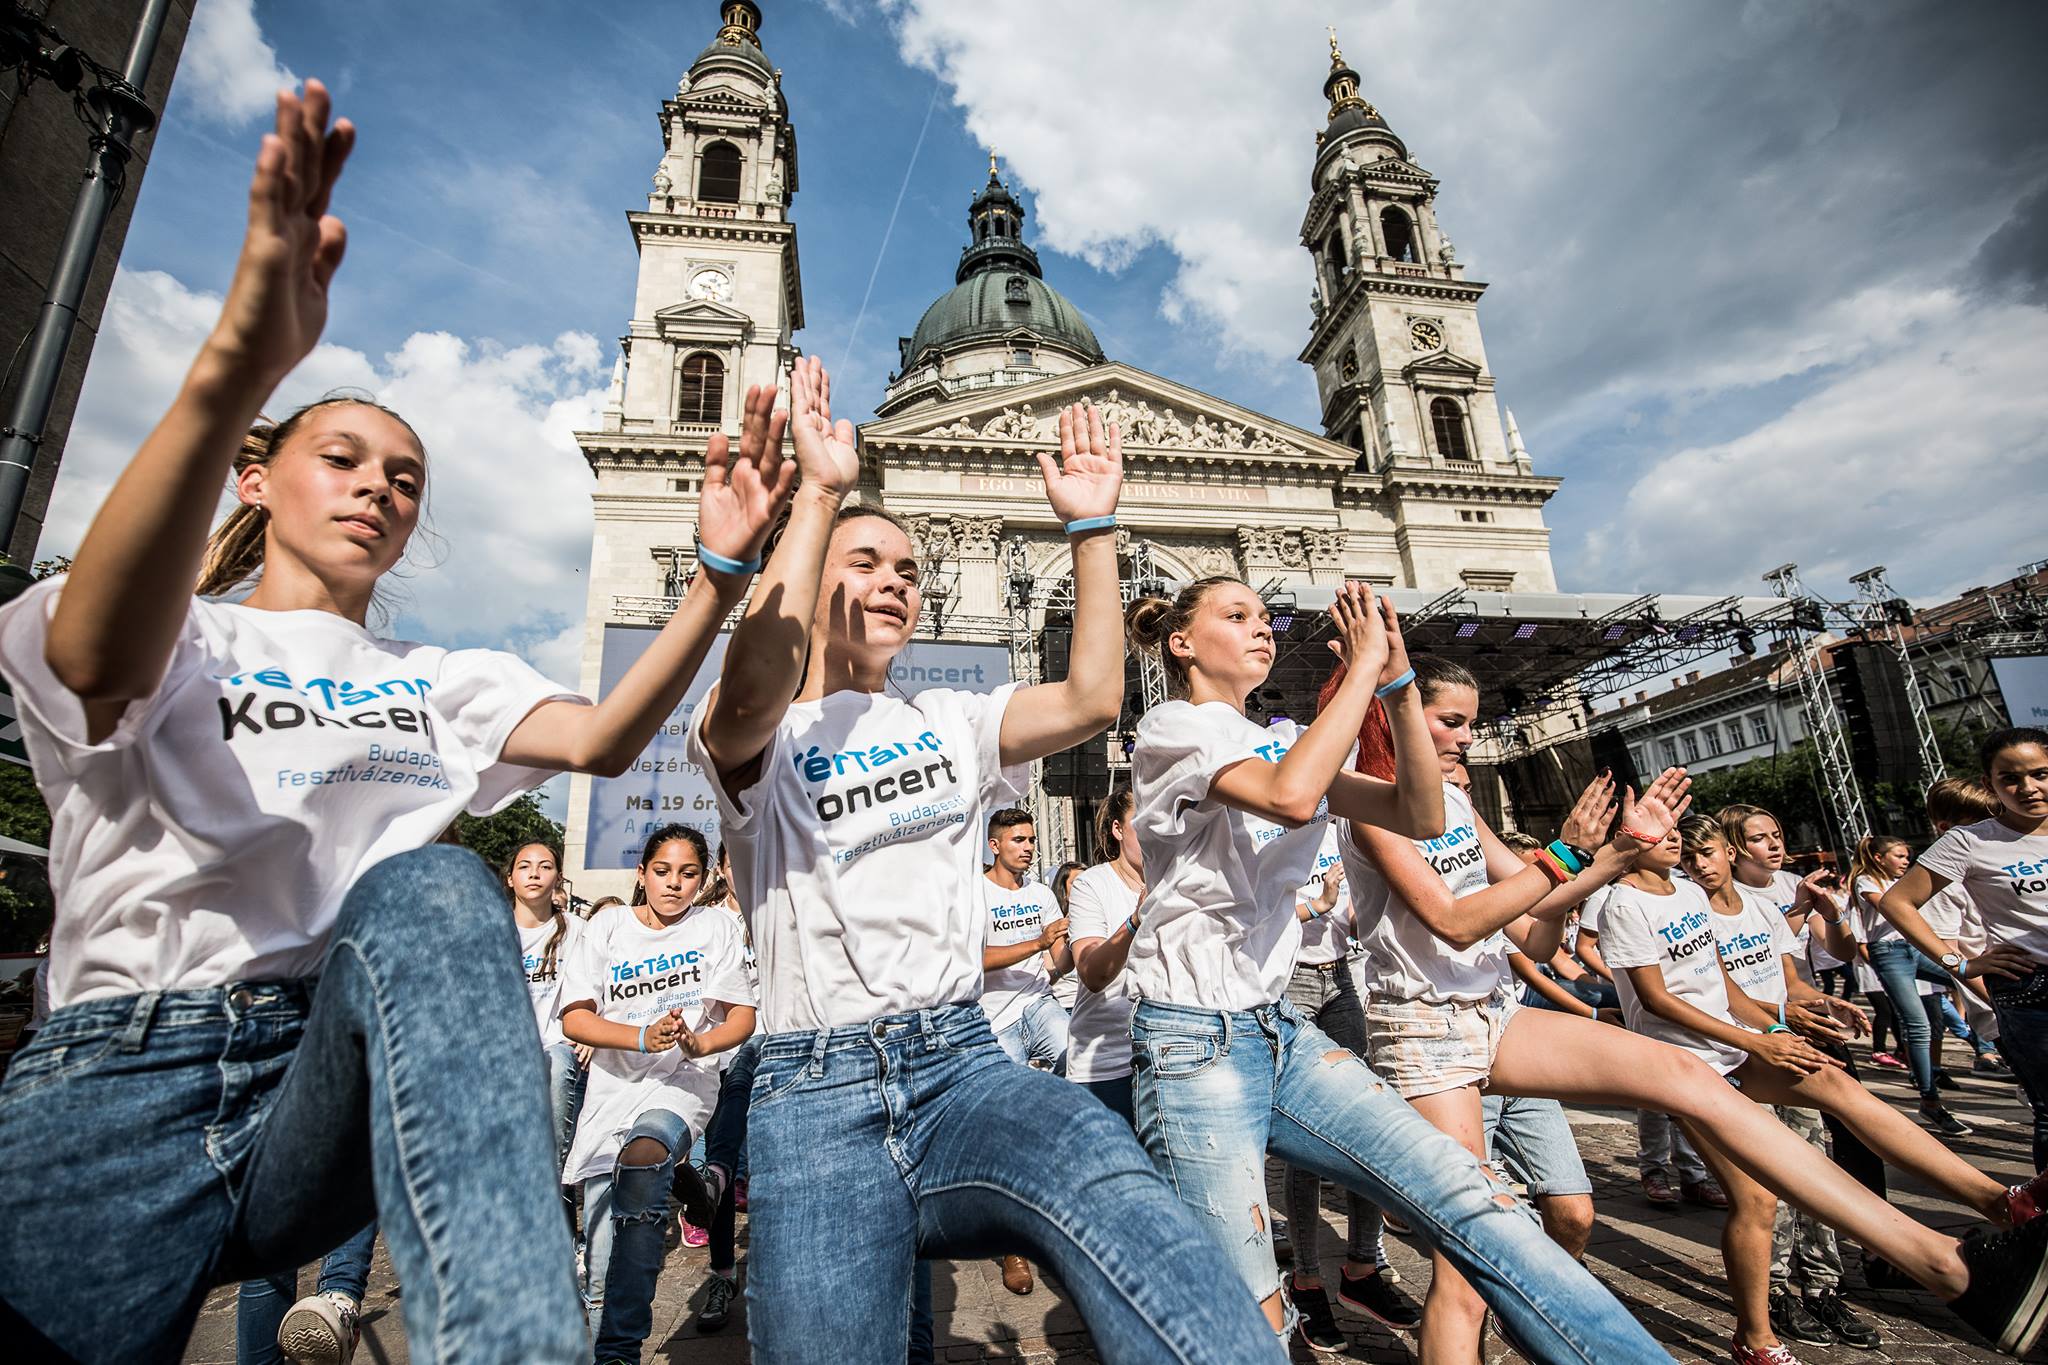 'Dancing On The Square: Music Of Freedom', St. Stephen’s Basilica In Budapest, 16 June